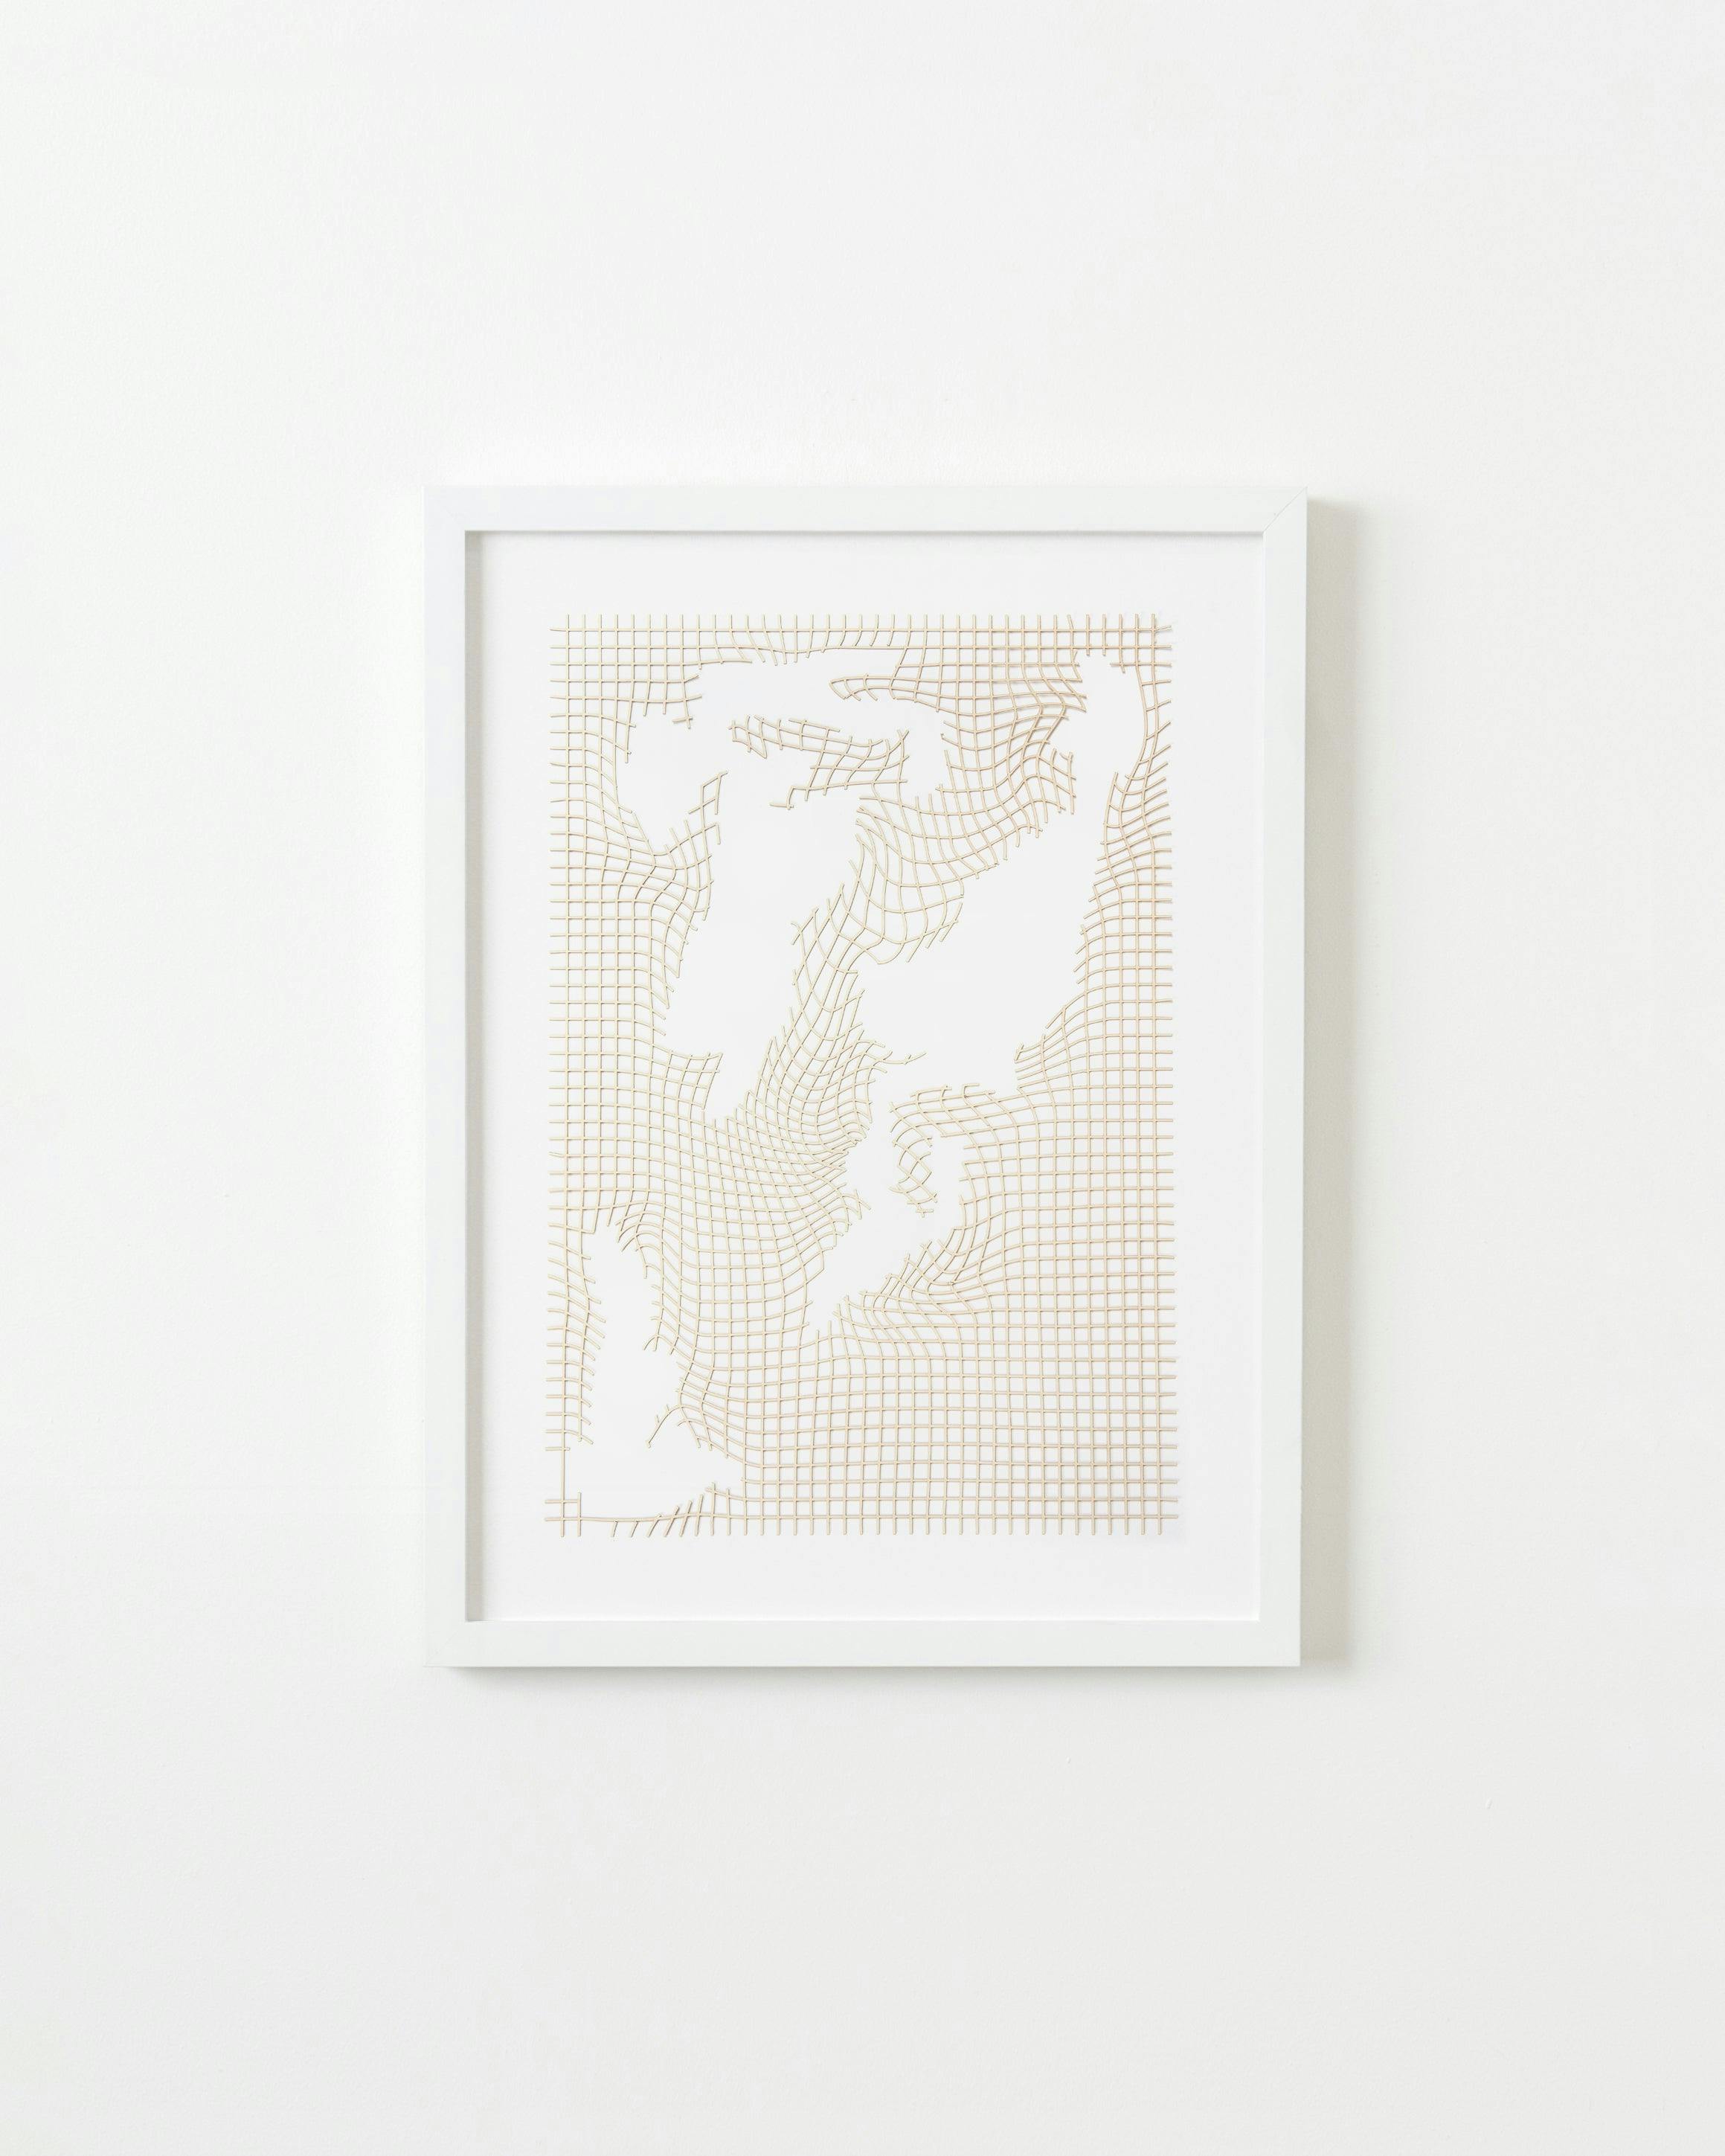 Print by Inka Bell titled "NET 7 (antique white)".